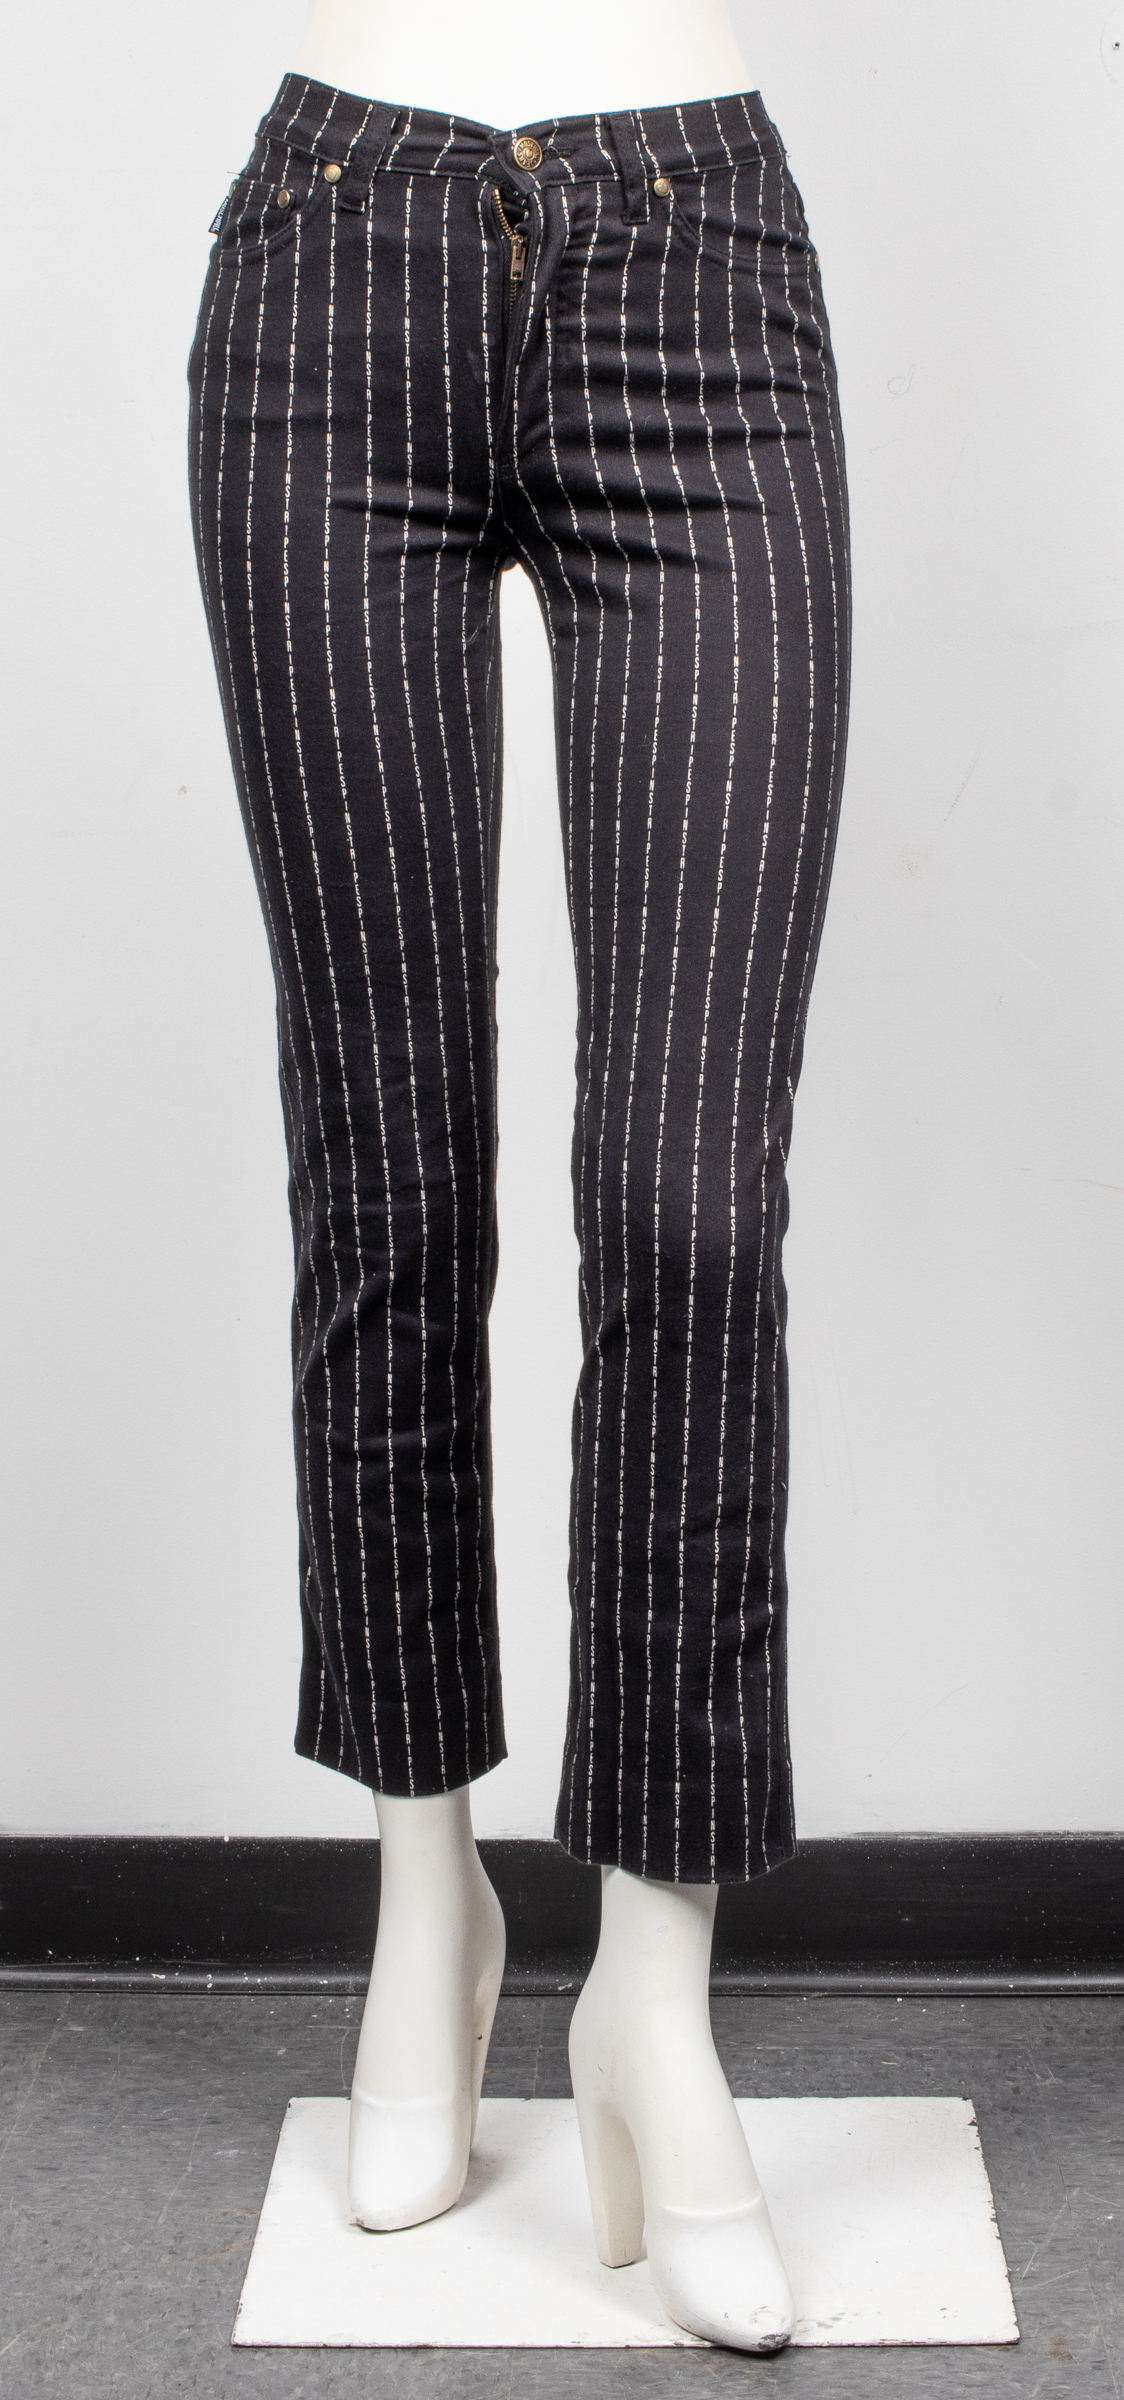 MOSCHINO "PIN STRIPES" SKINNY JEANS,